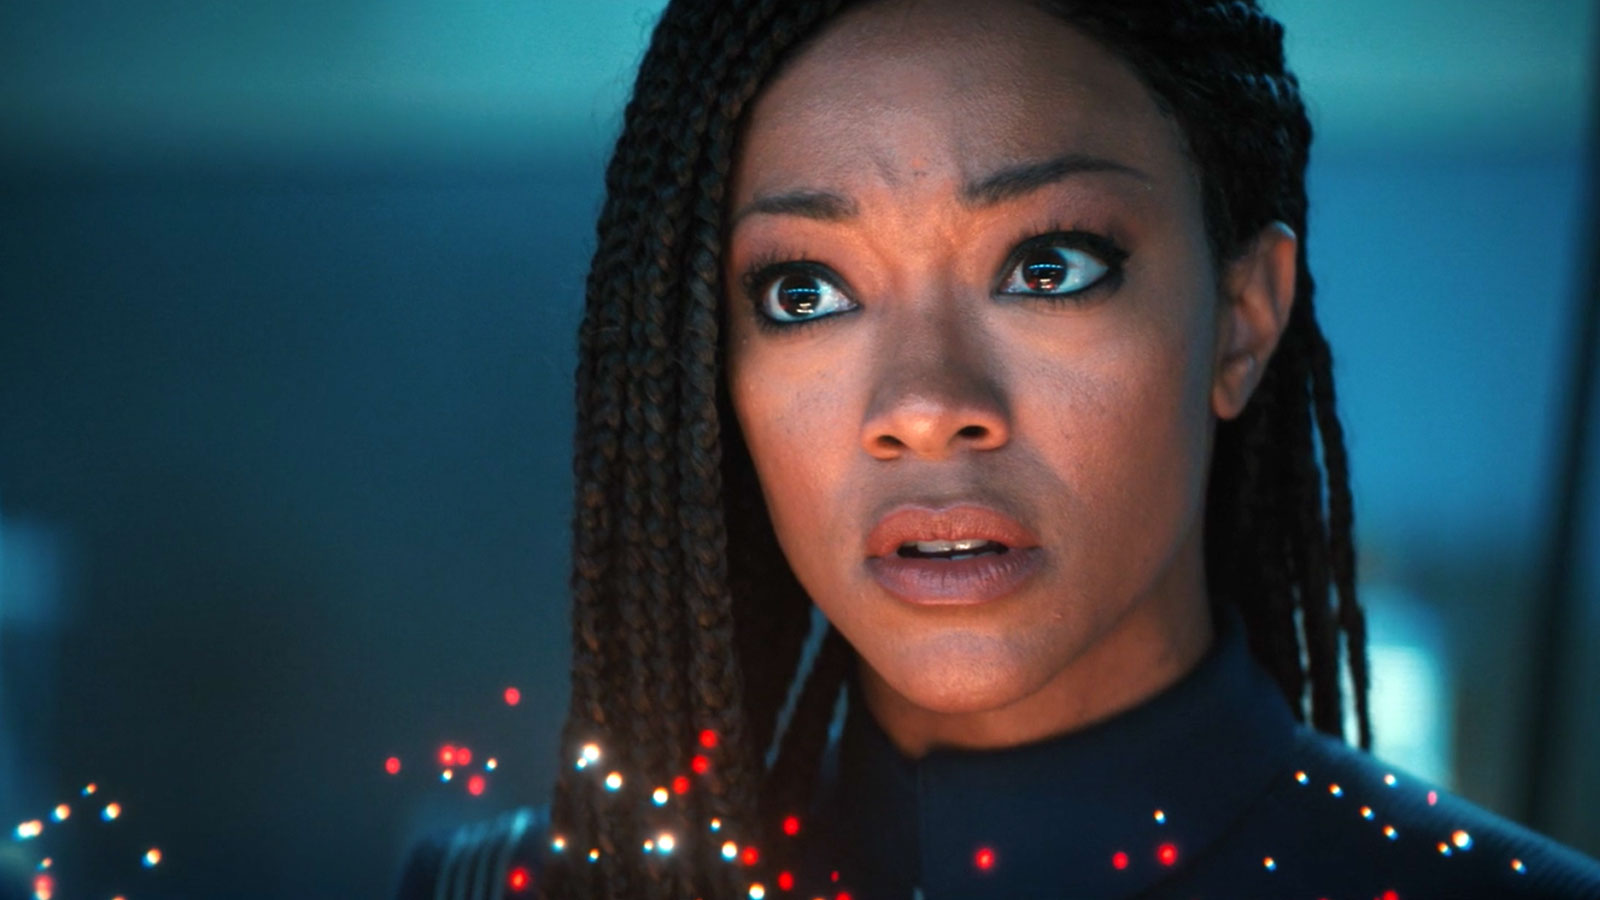 Star Trek: Discovery – Season 3, Episode 7 “Unification III” Review: Discovery Helps Unify The Franchise